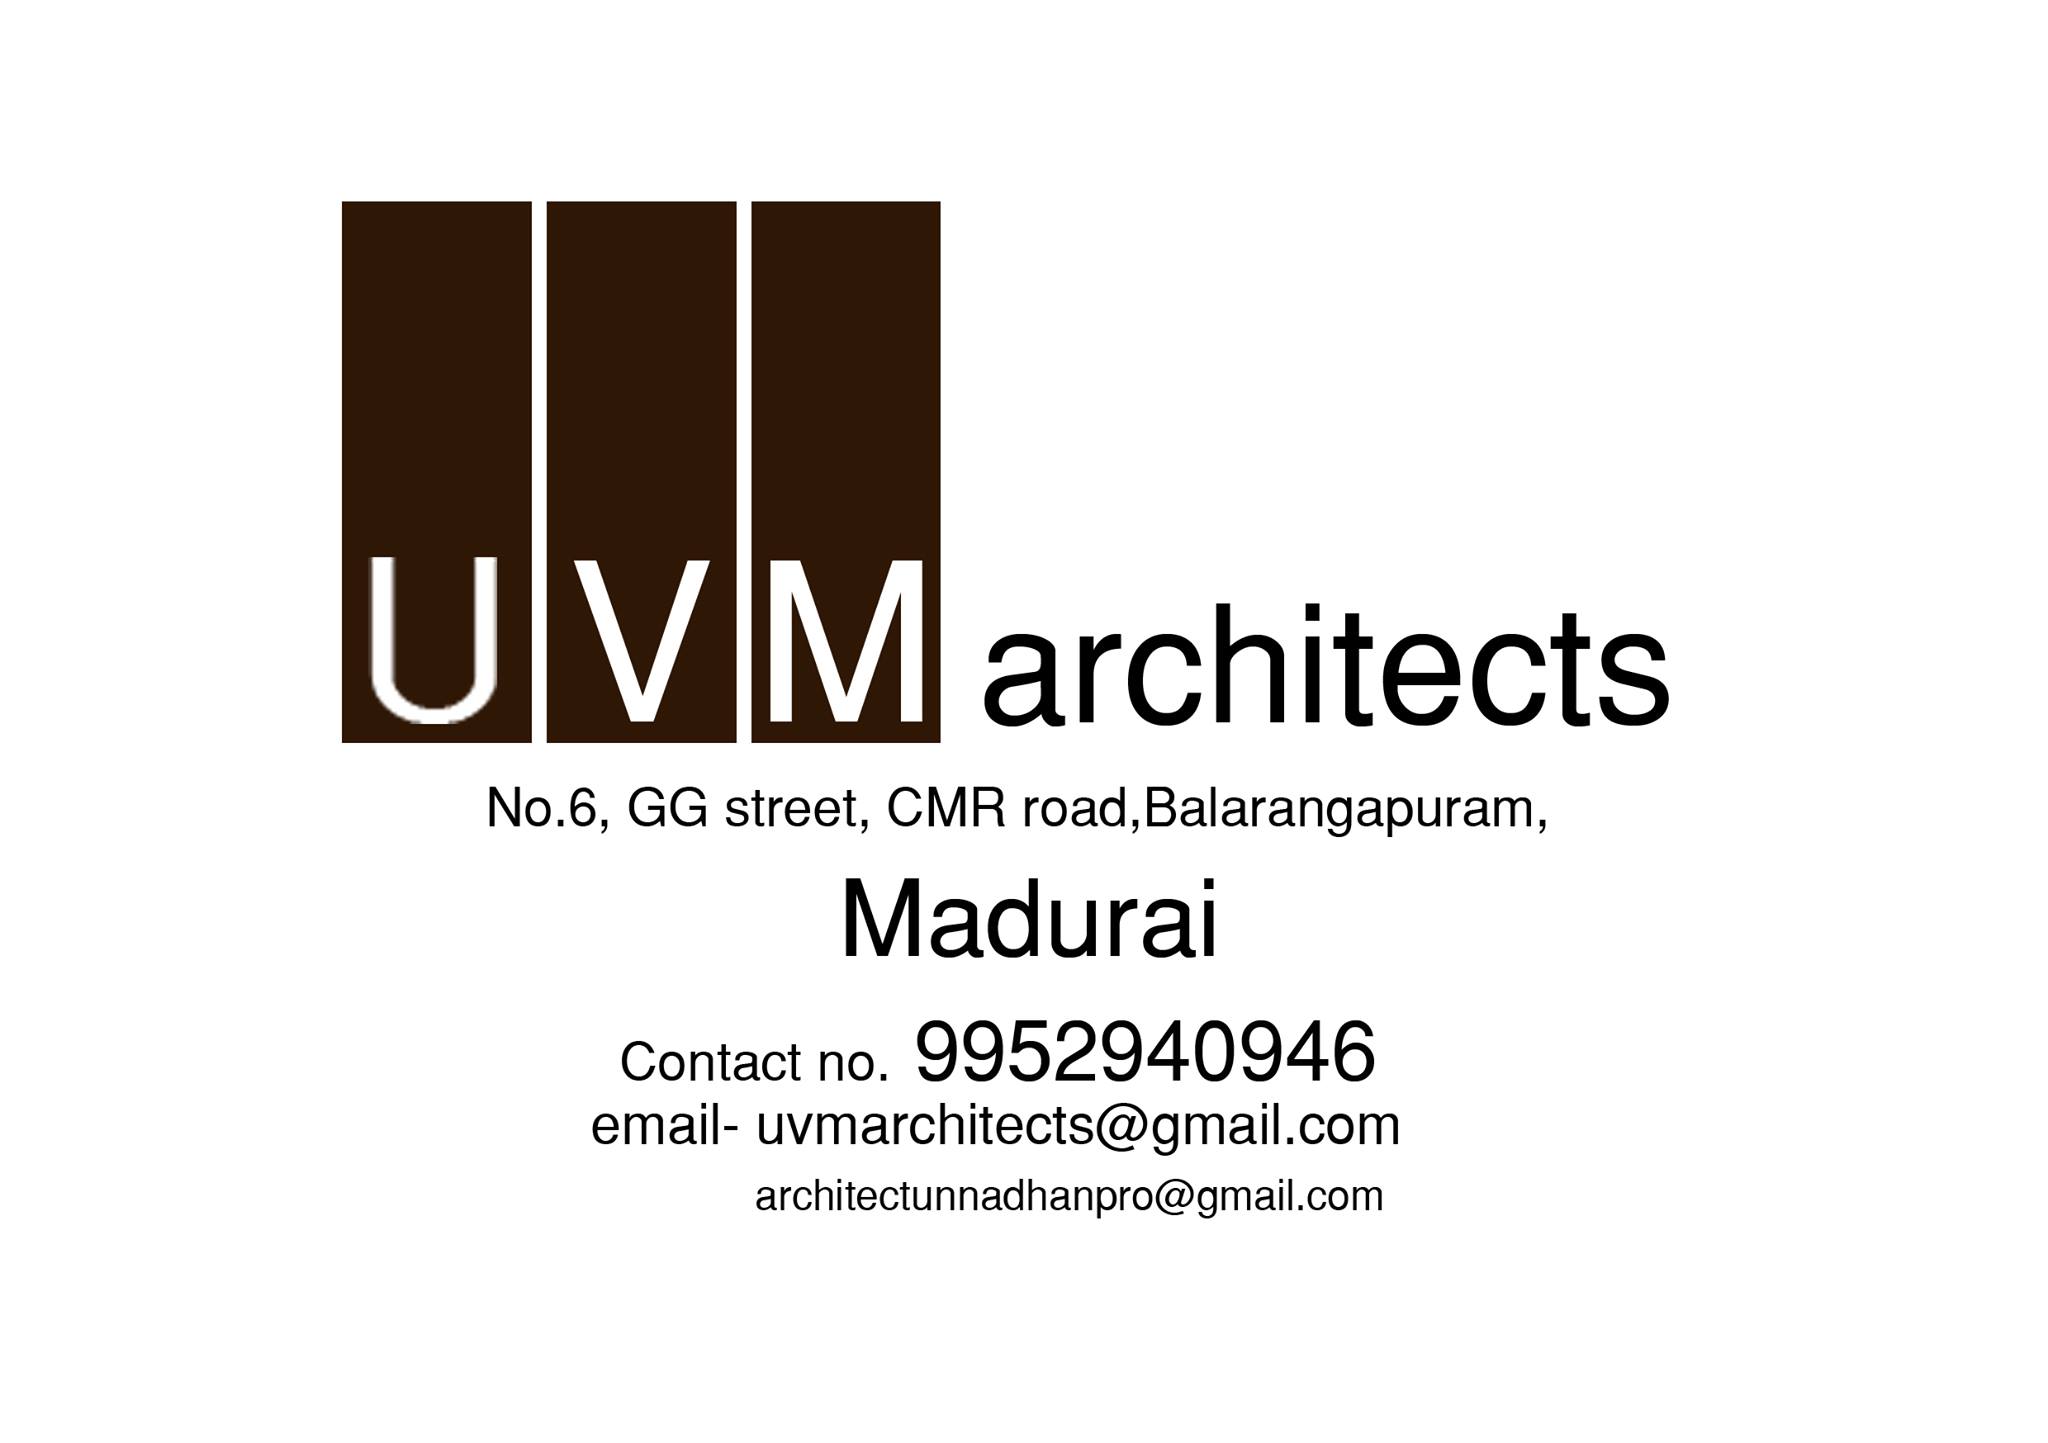 UVM Architects|Accounting Services|Professional Services